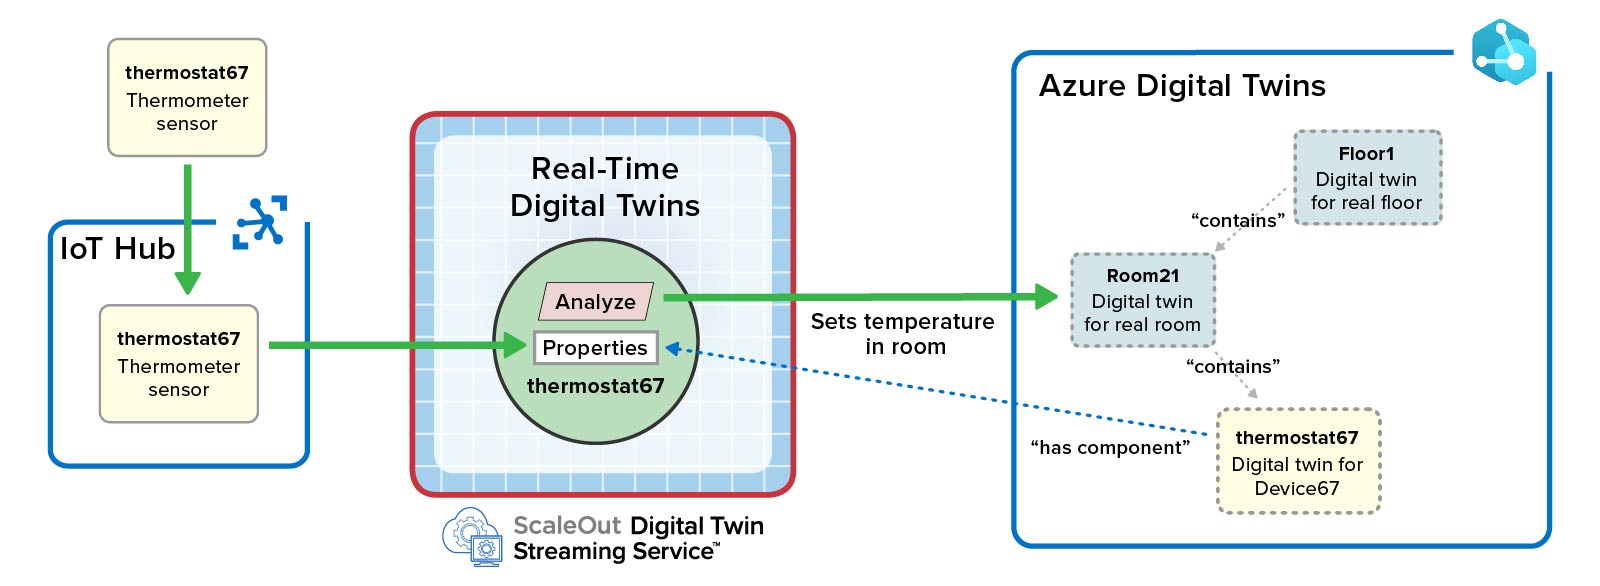 Example of message flow with Azure Digital Twins using in-memory computing with real-time digital twins